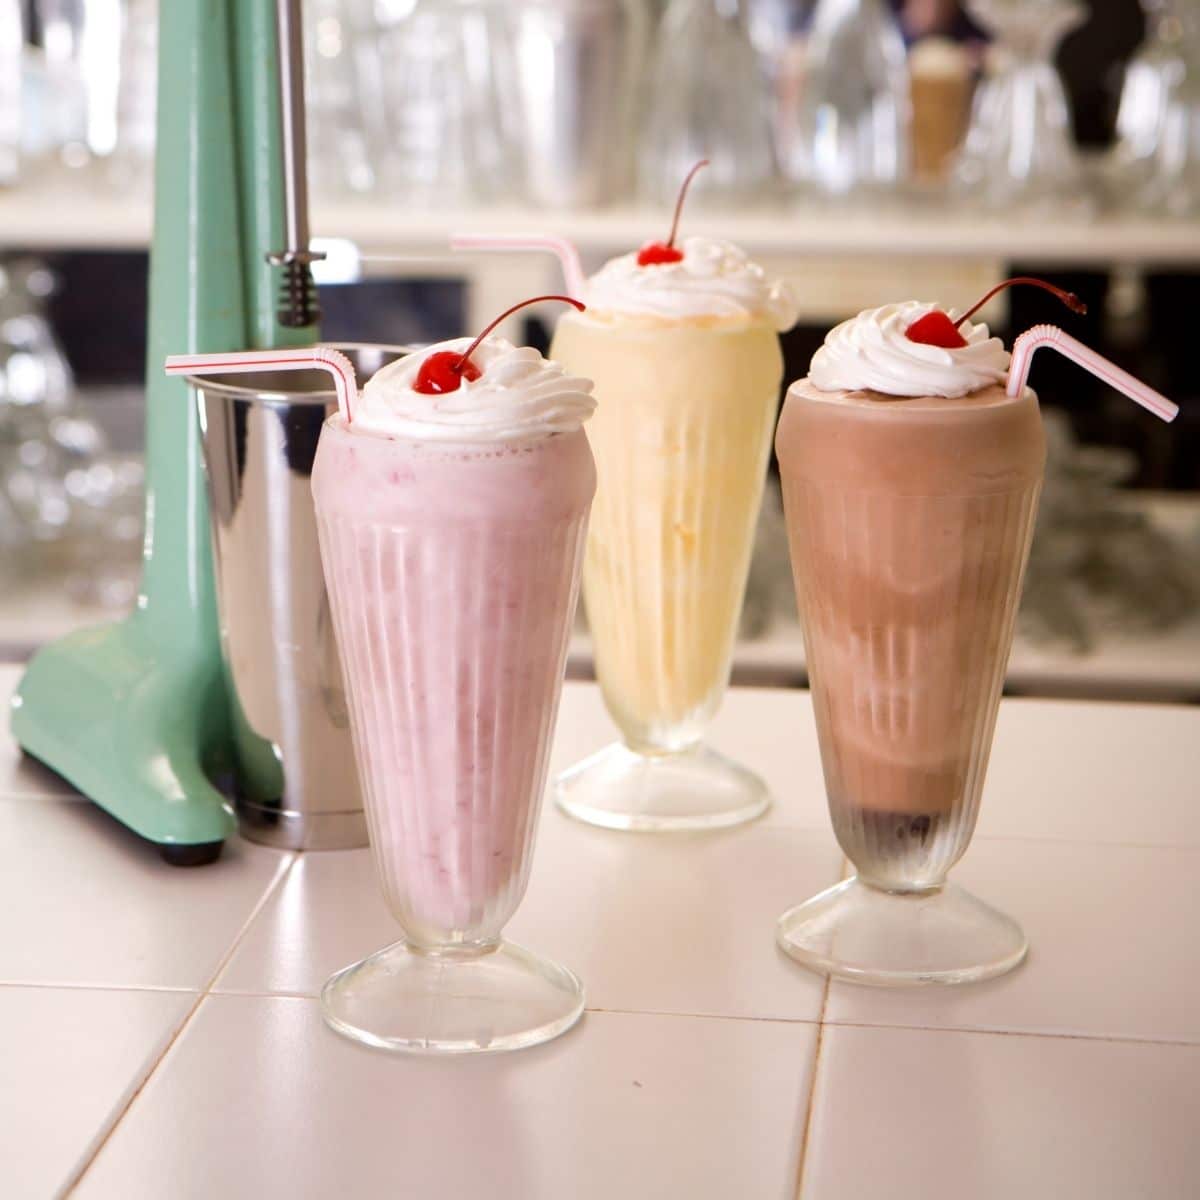 Shakes vs Malts learn the difference in these frozen dessert treats.